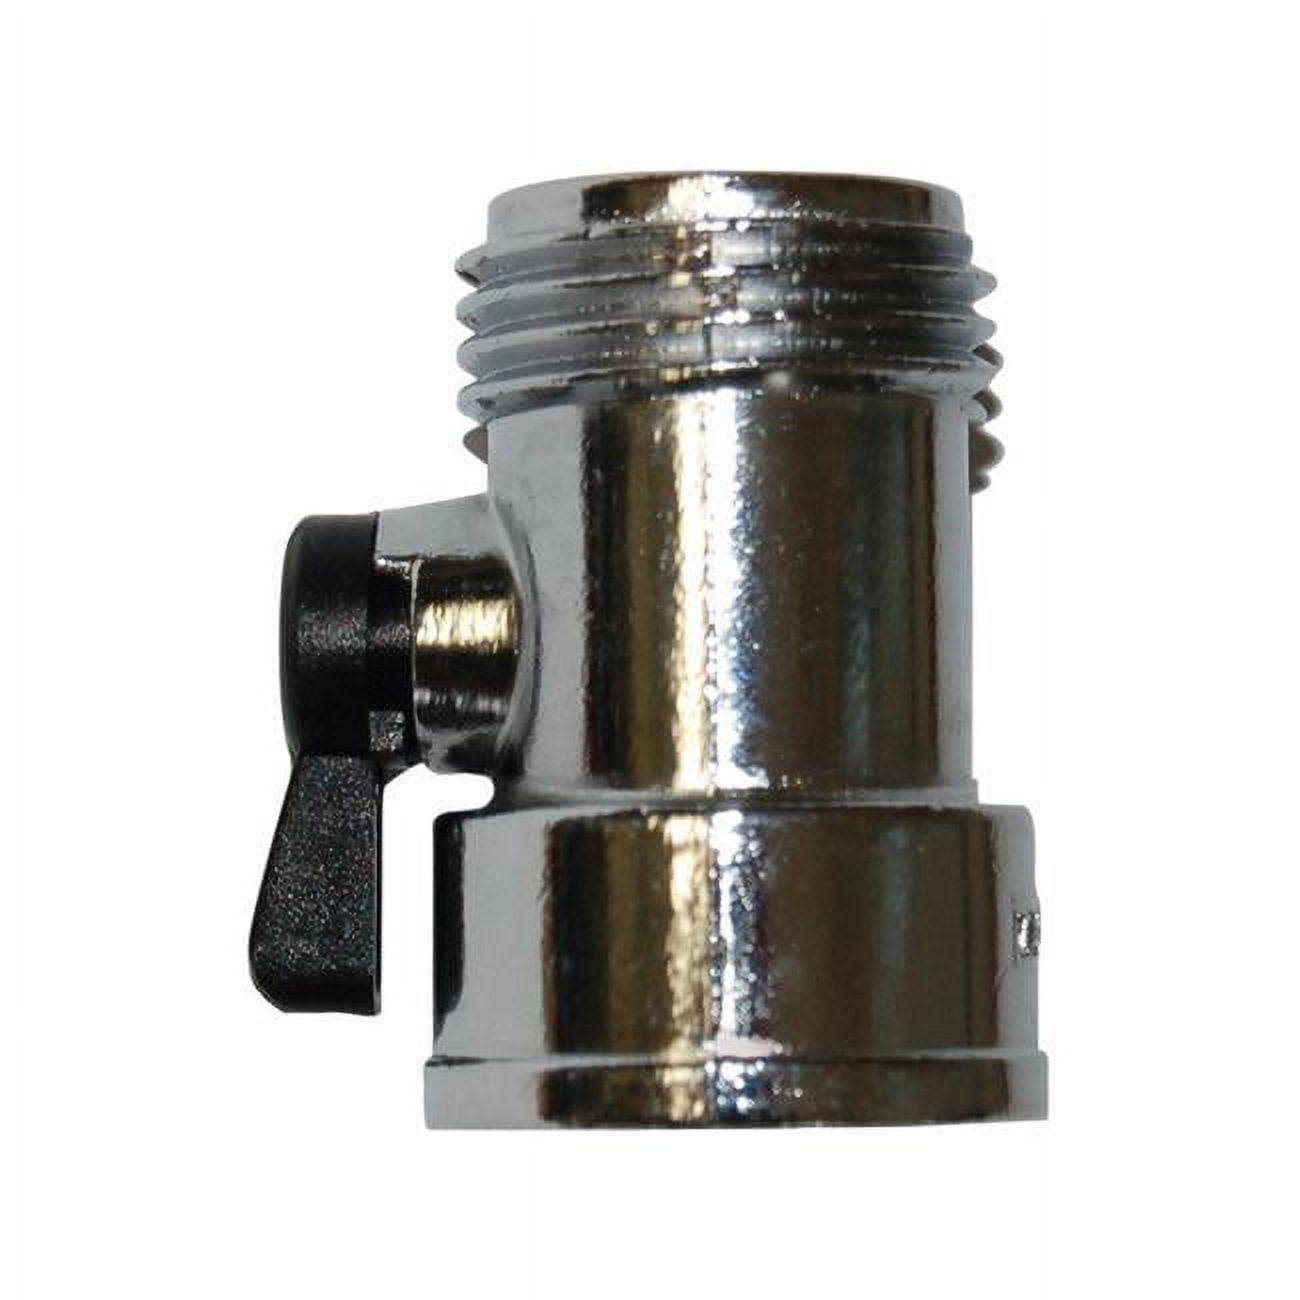 Picture of Rugg 7690738 0.75 in. Zinc Threaded Male Hose Shut-Off Valve - Pack of 30